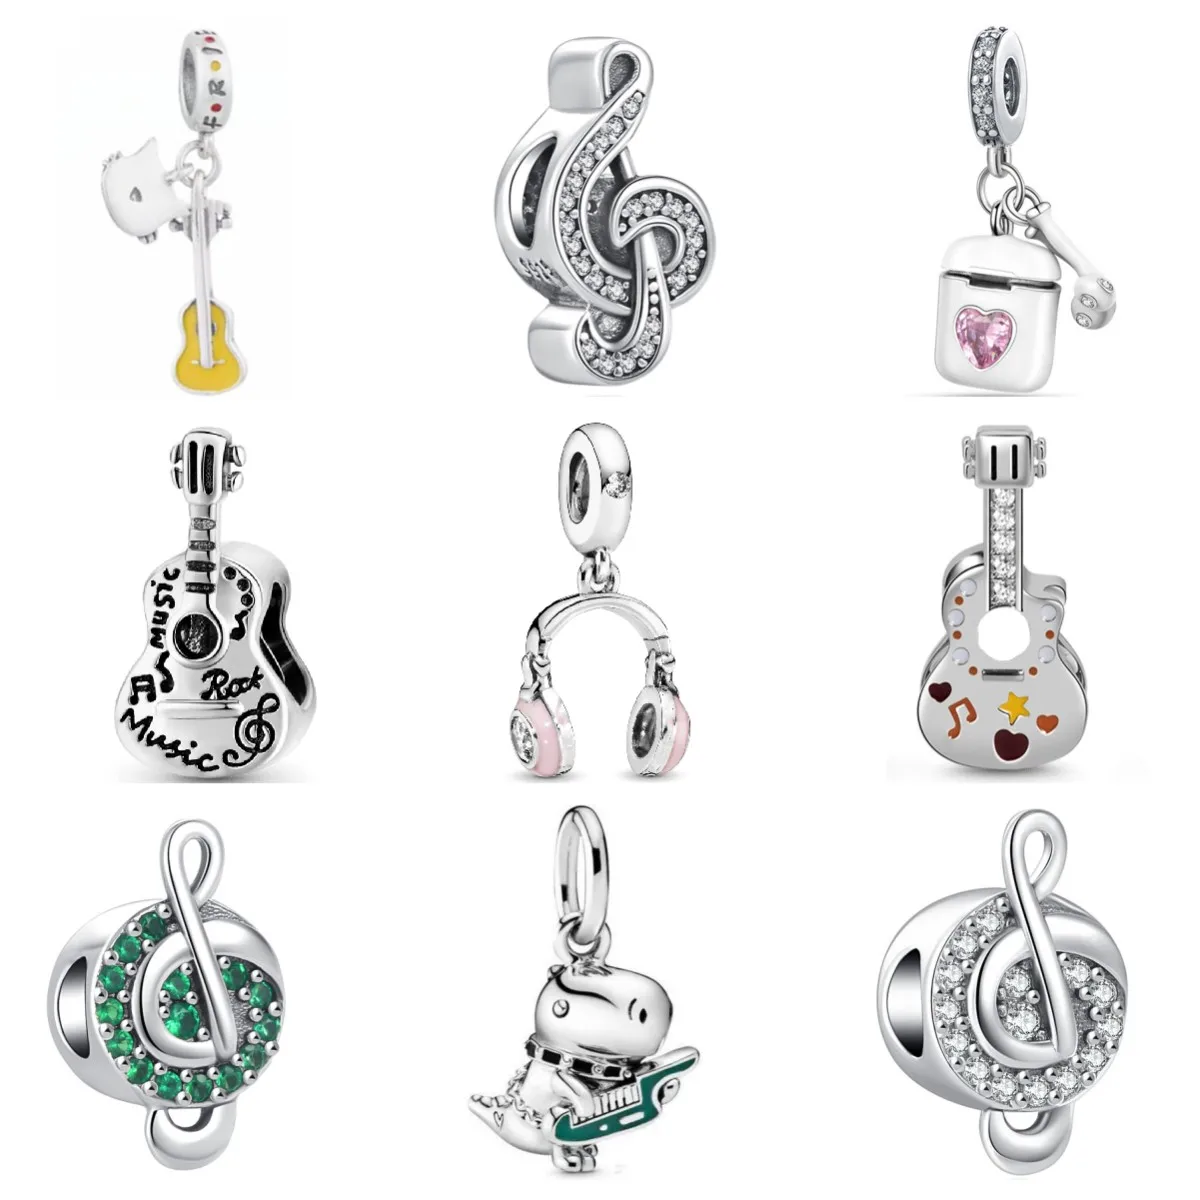 

925 Sterling Silve Guitar Musical Note Headphones Beads Dangle Charms Fit Original Pandora Charm Bracelet For Women DIY Jewelry